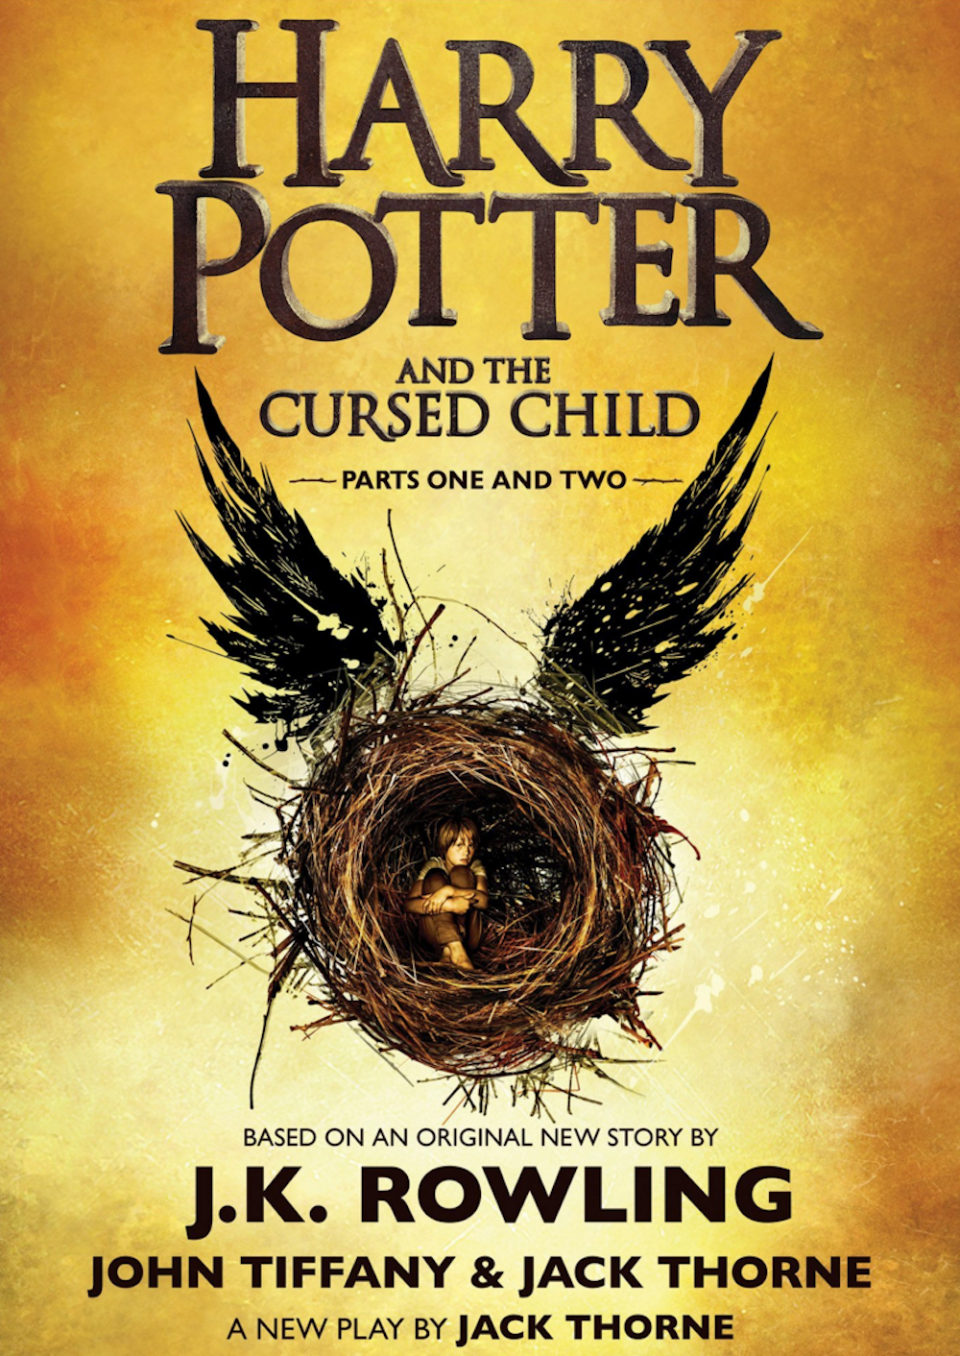 Libra: Harry Potter and the Cursed Child: Parts I &II